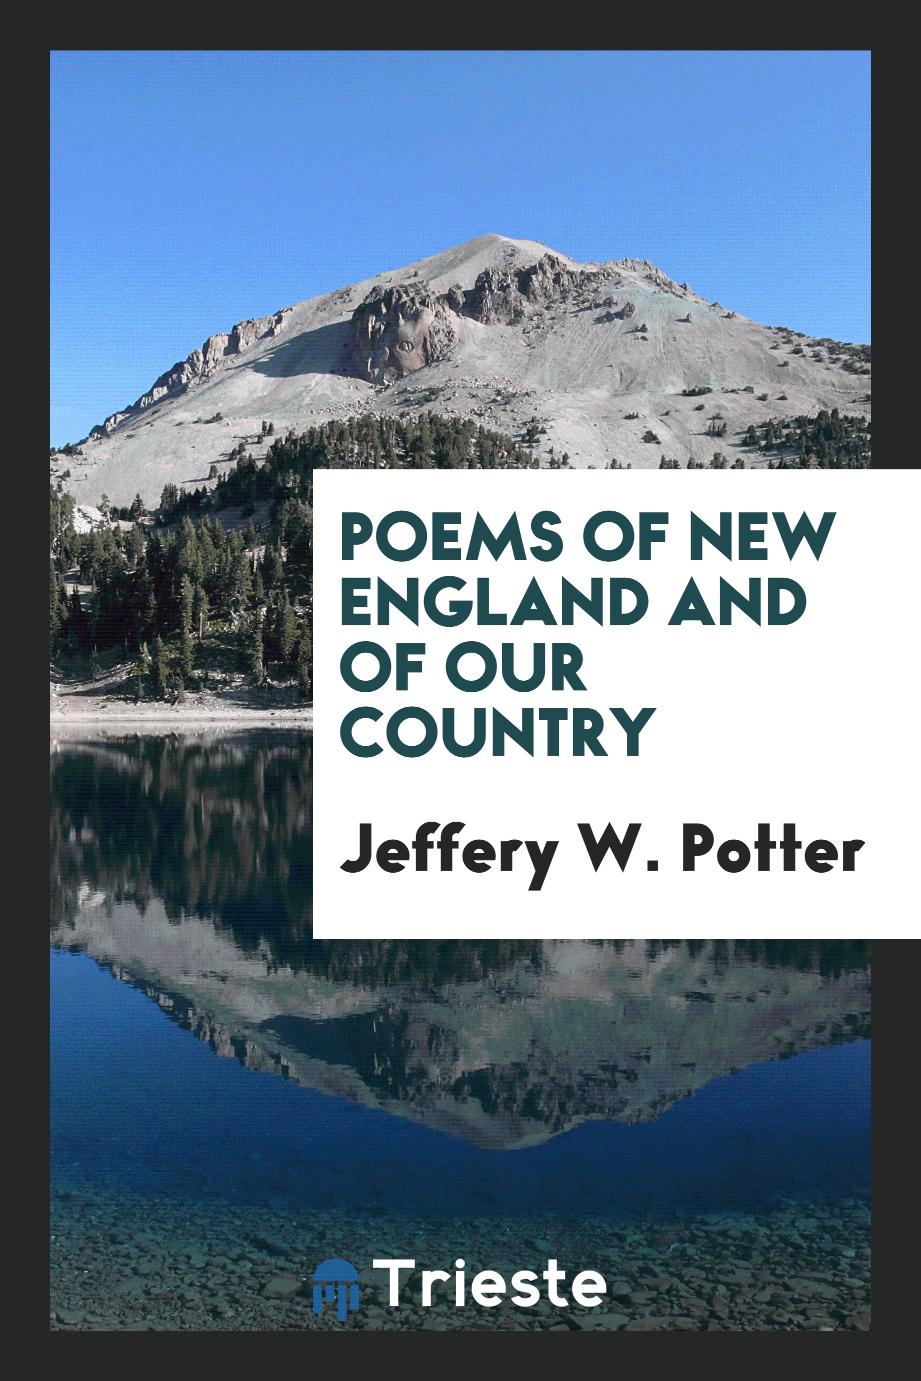 Poems of New England and of Our Country